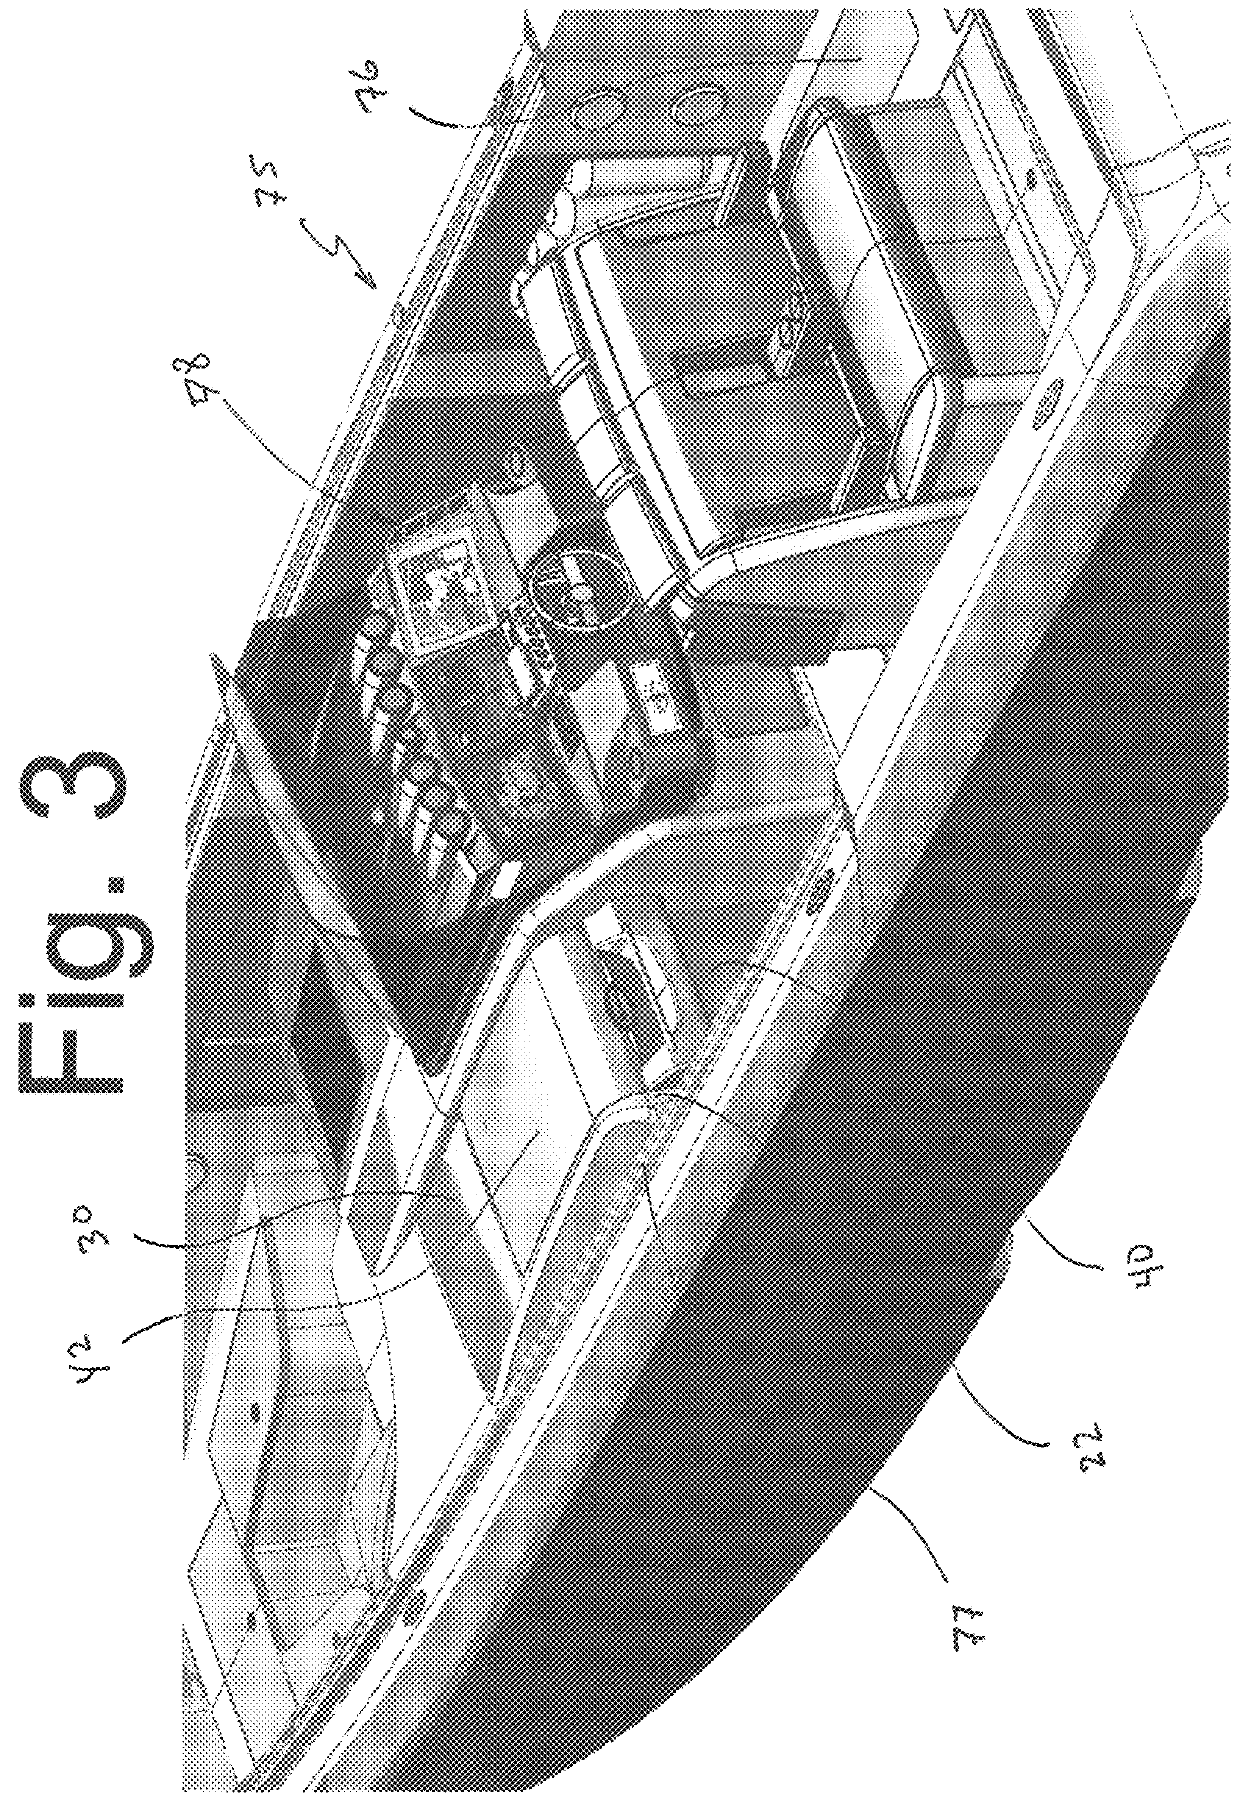 Underdeck mid-cabin entry system for mono hull boat